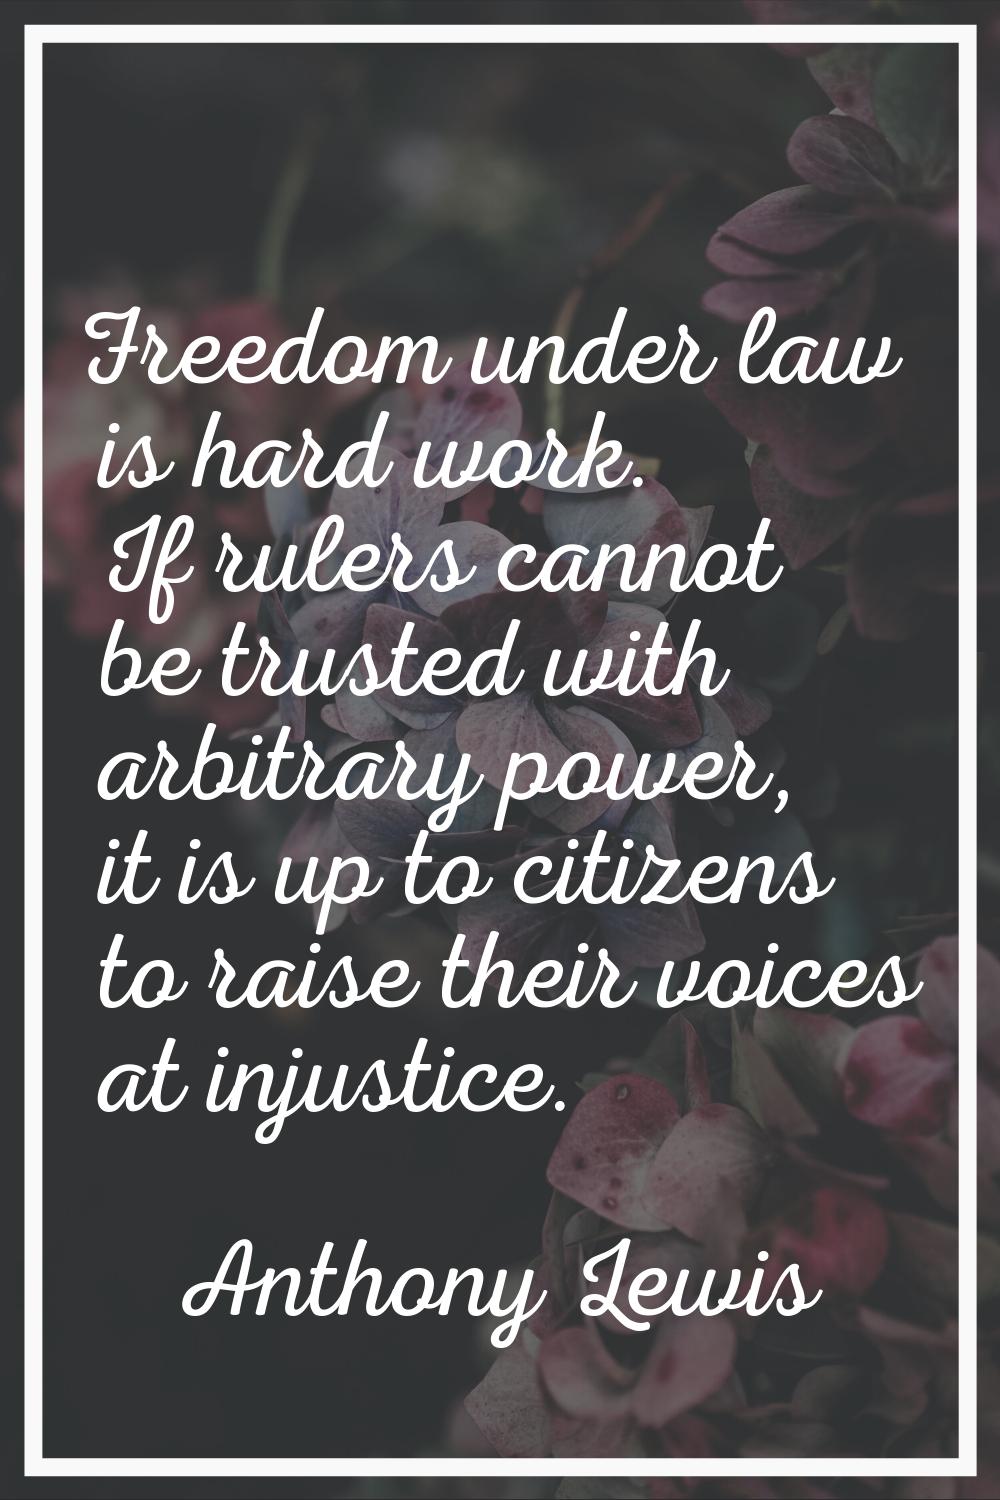 Freedom under law is hard work. If rulers cannot be trusted with arbitrary power, it is up to citiz